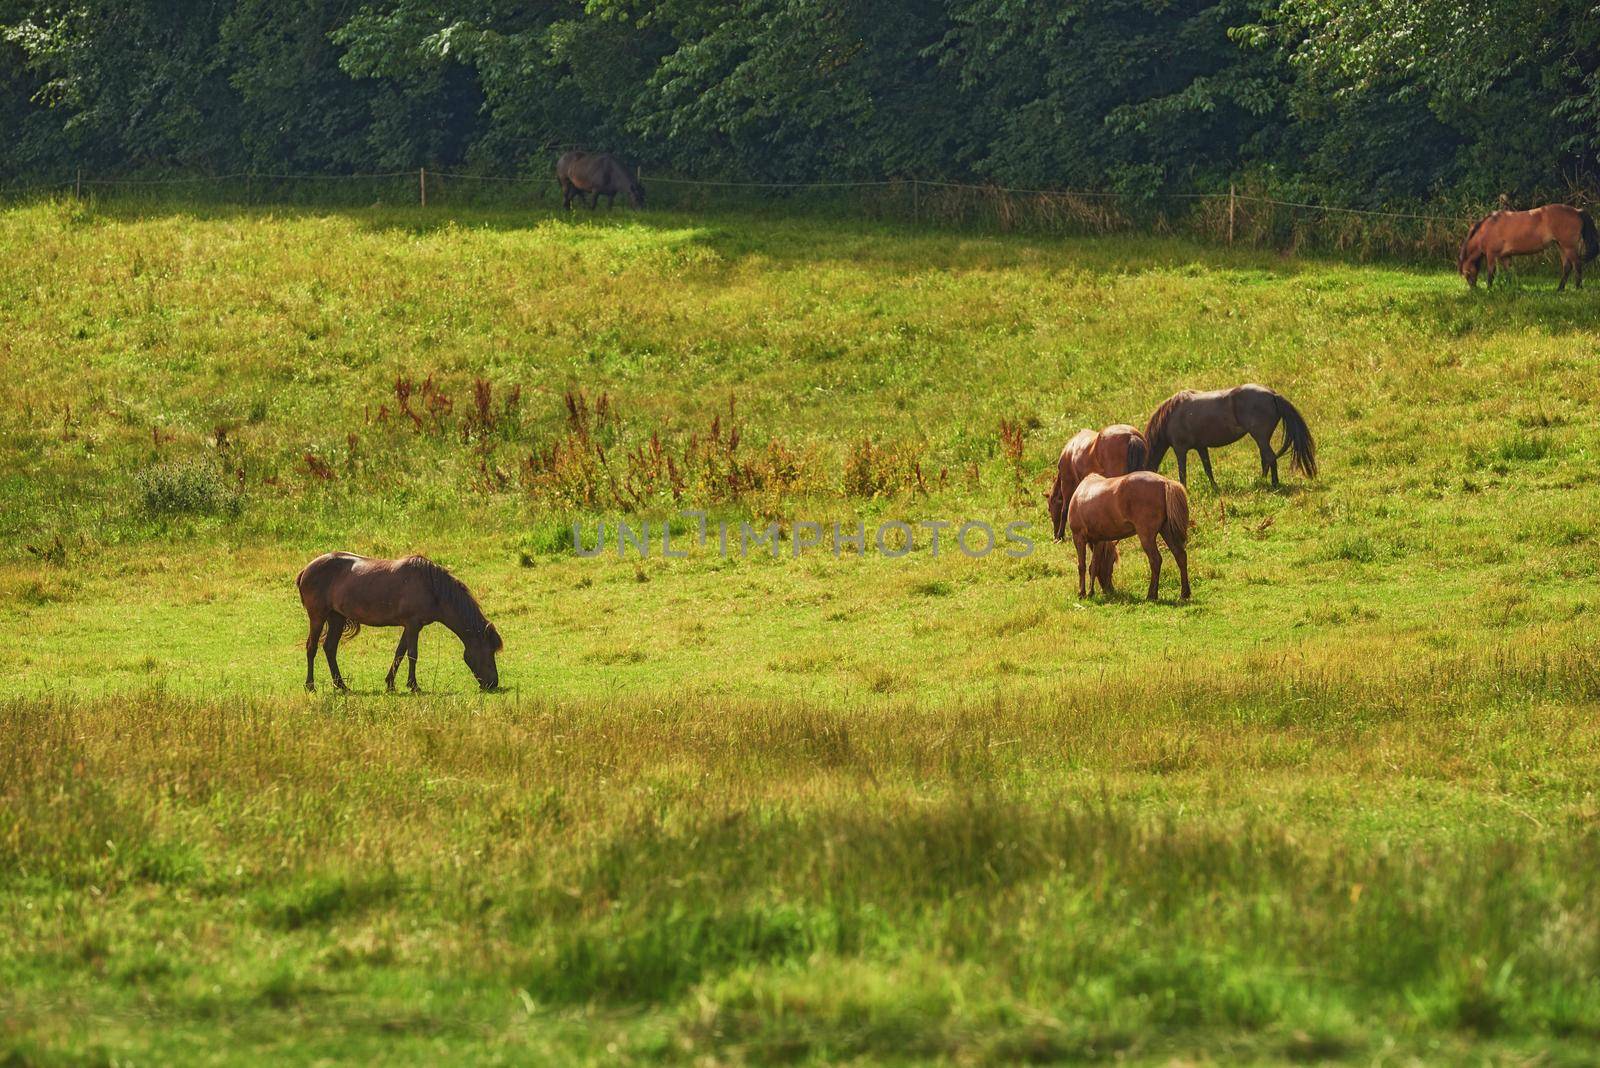 Herd of brown horses eating grass while roaming on a field in the countryside with copyspace. Stallion animals grazing on green meadow in the sun. Breeding livestock equine animals on a ranch or farm.